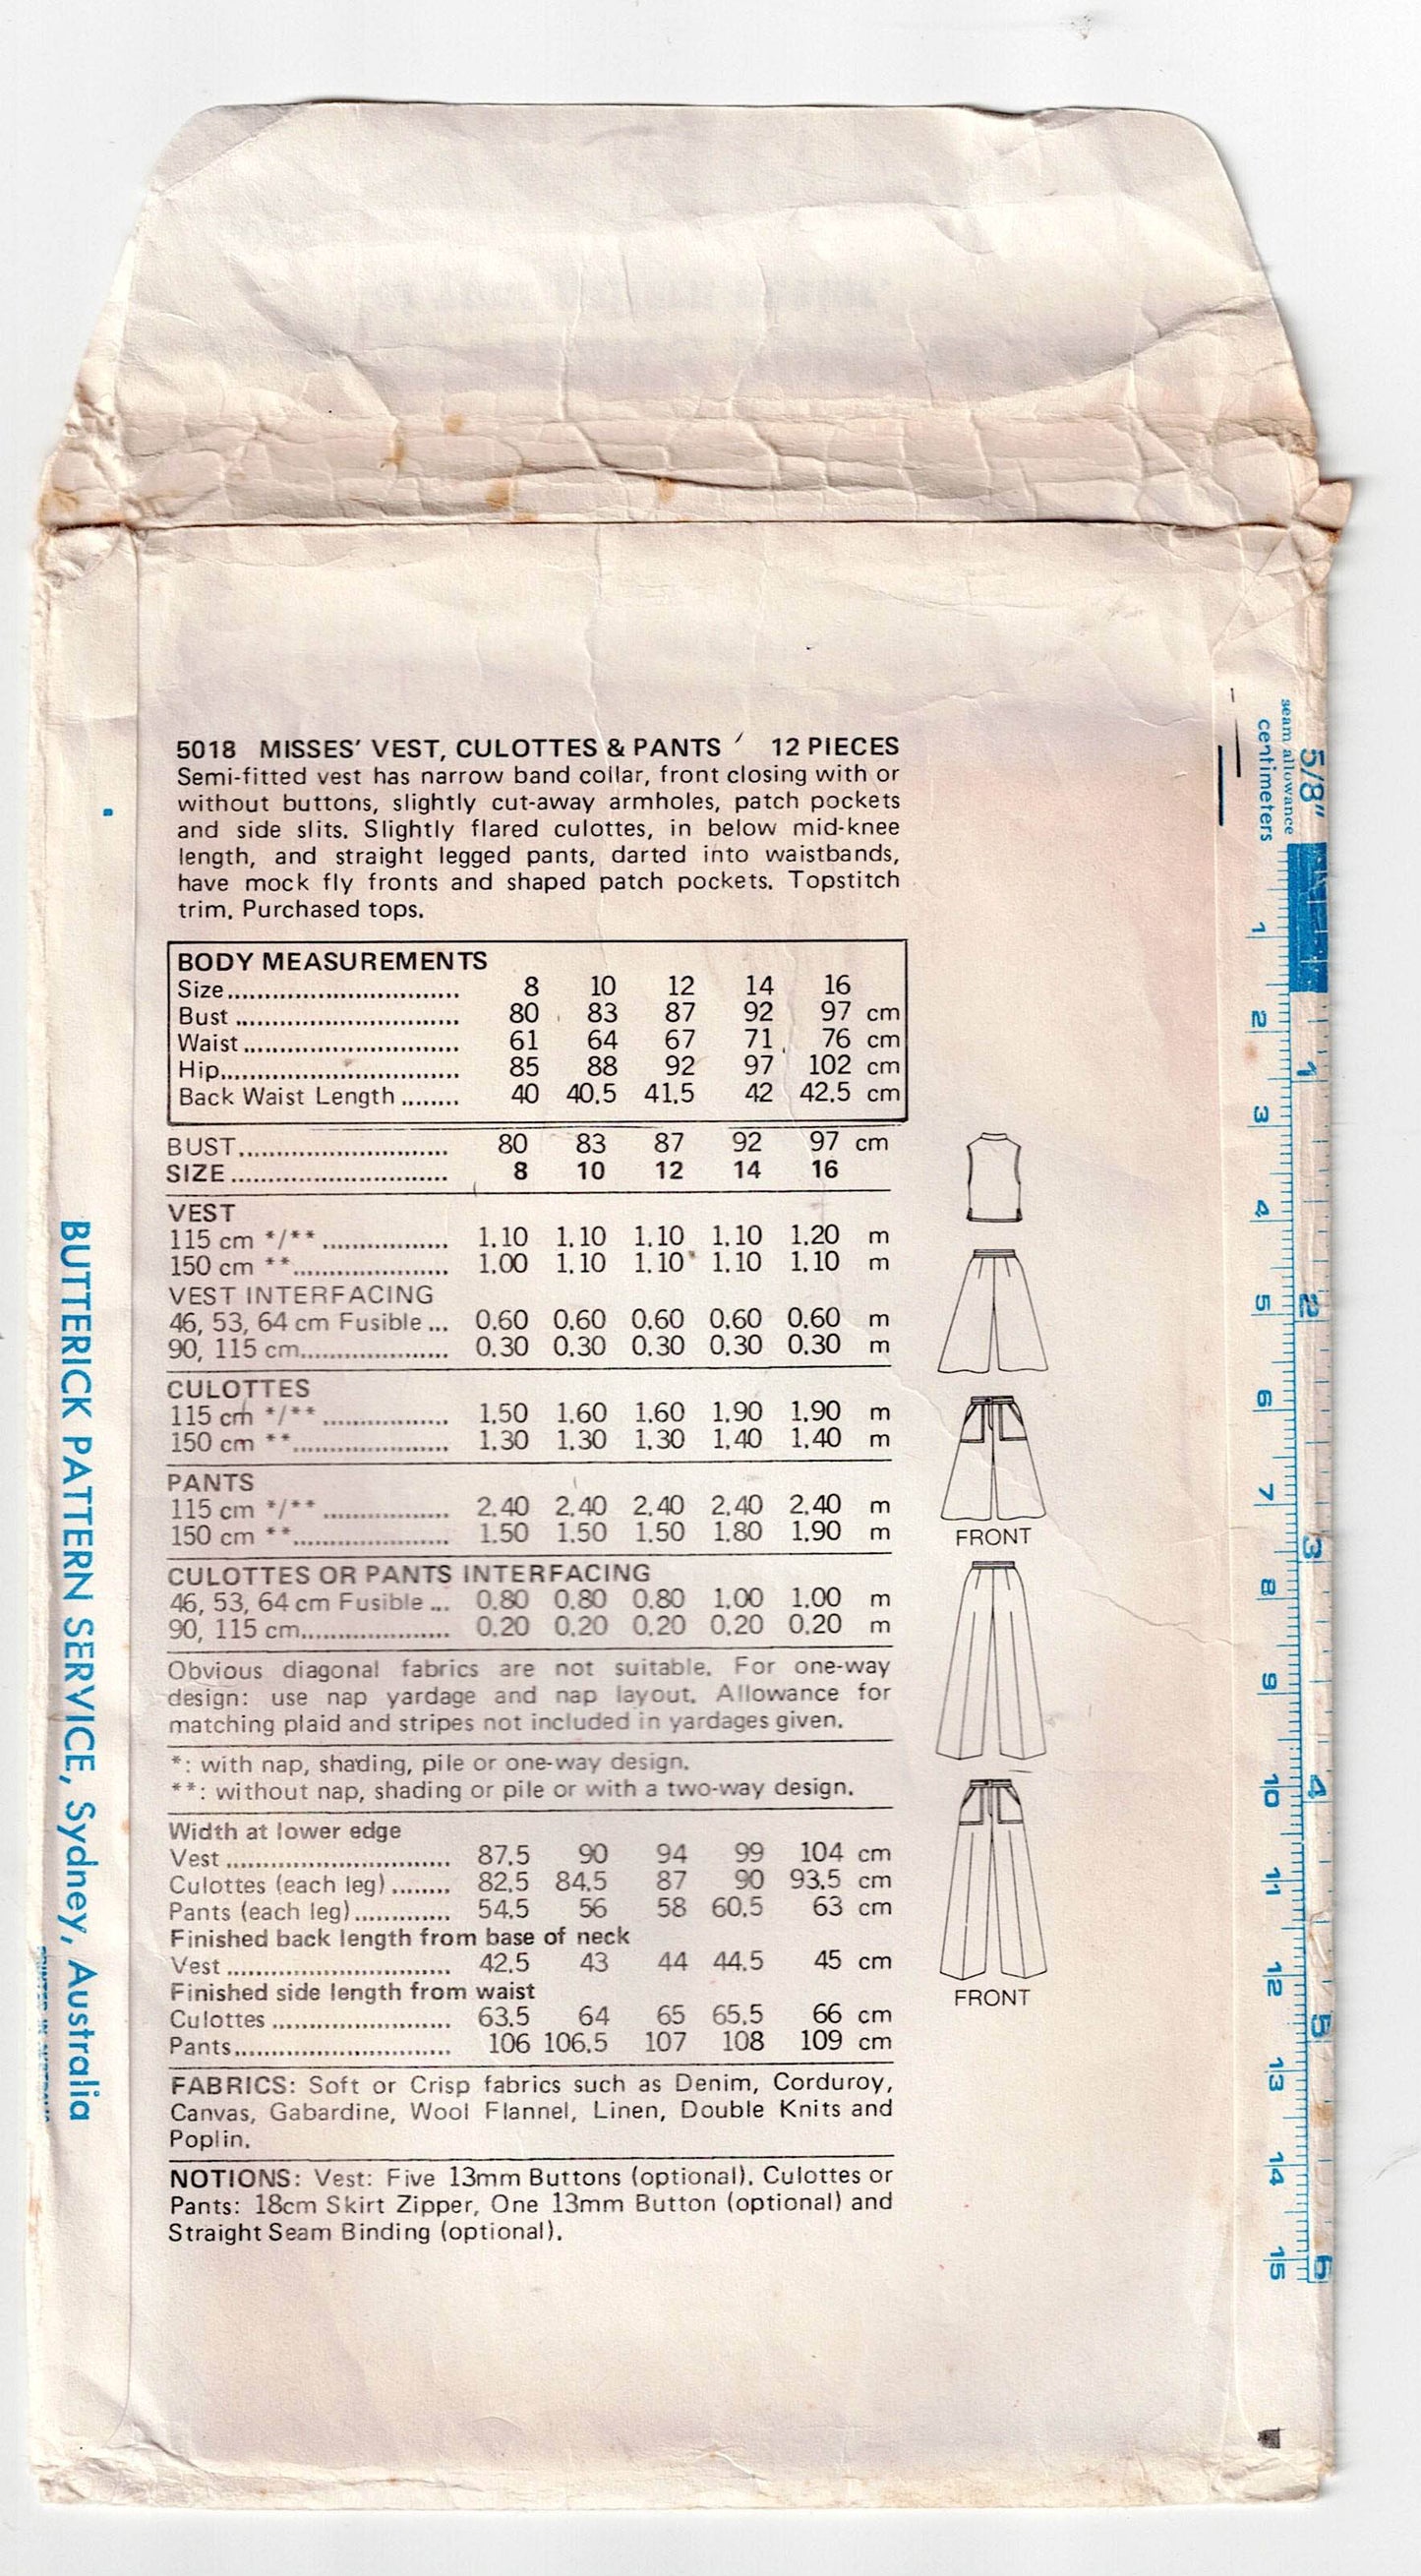 Butterick 5018 Womens Vest Culottes & Wide Leg Pants 1970s Vintage Sewing Pattern Size 10 Bust 32.5 inches